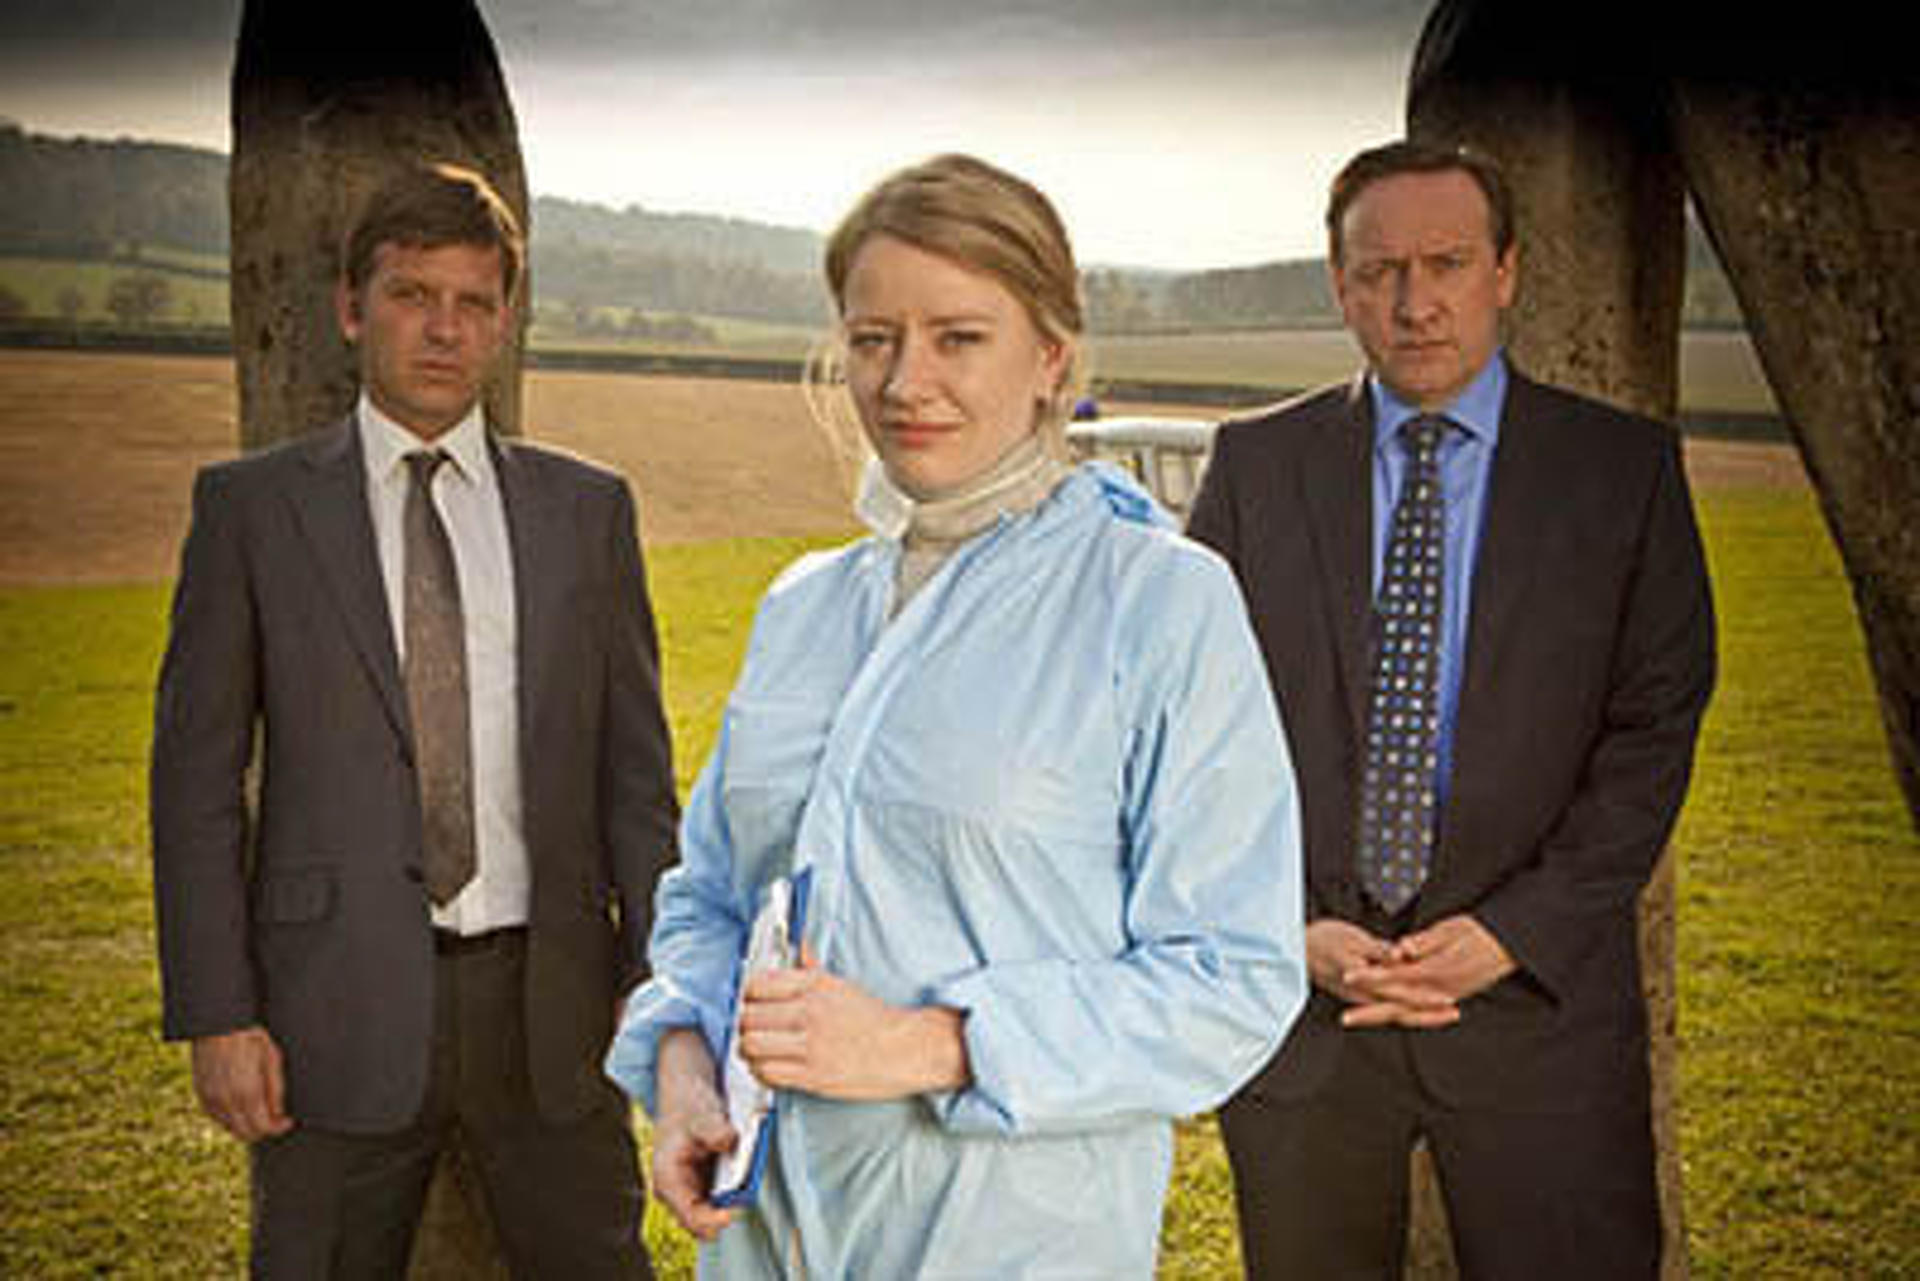 midsomer murders the incident at cooper hill